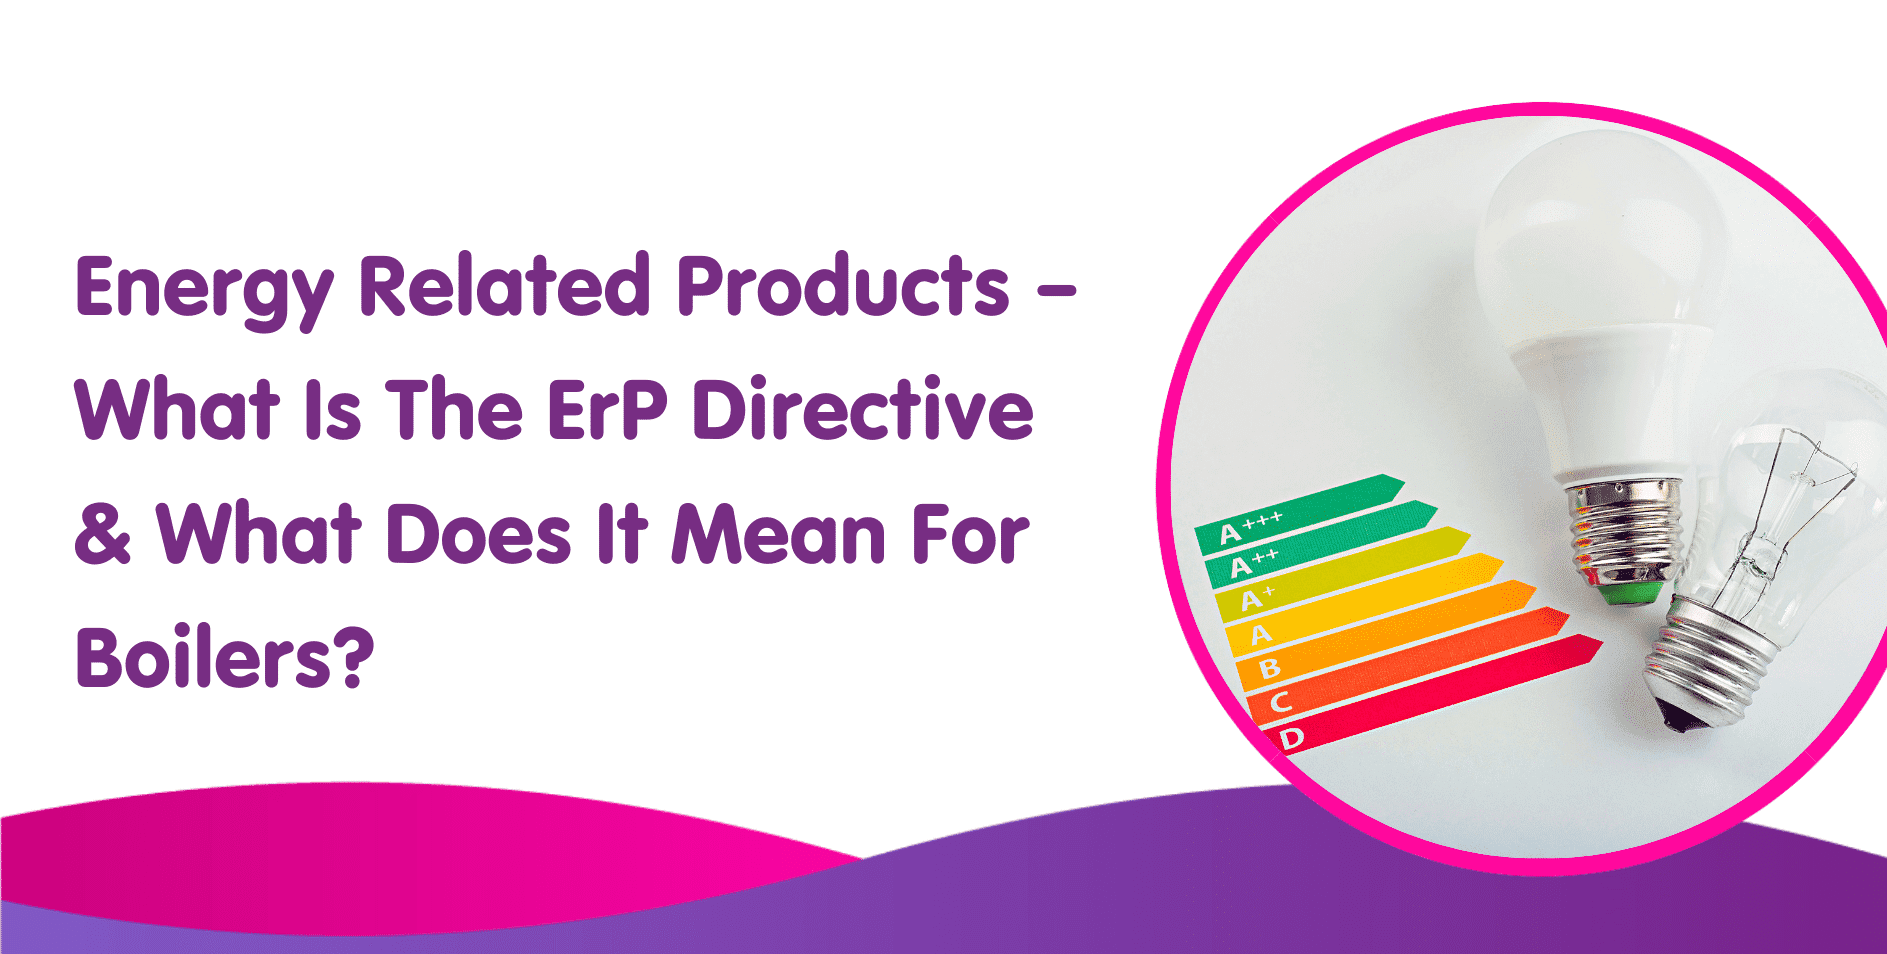 Energy Related Products – What Is The ErP Directive?